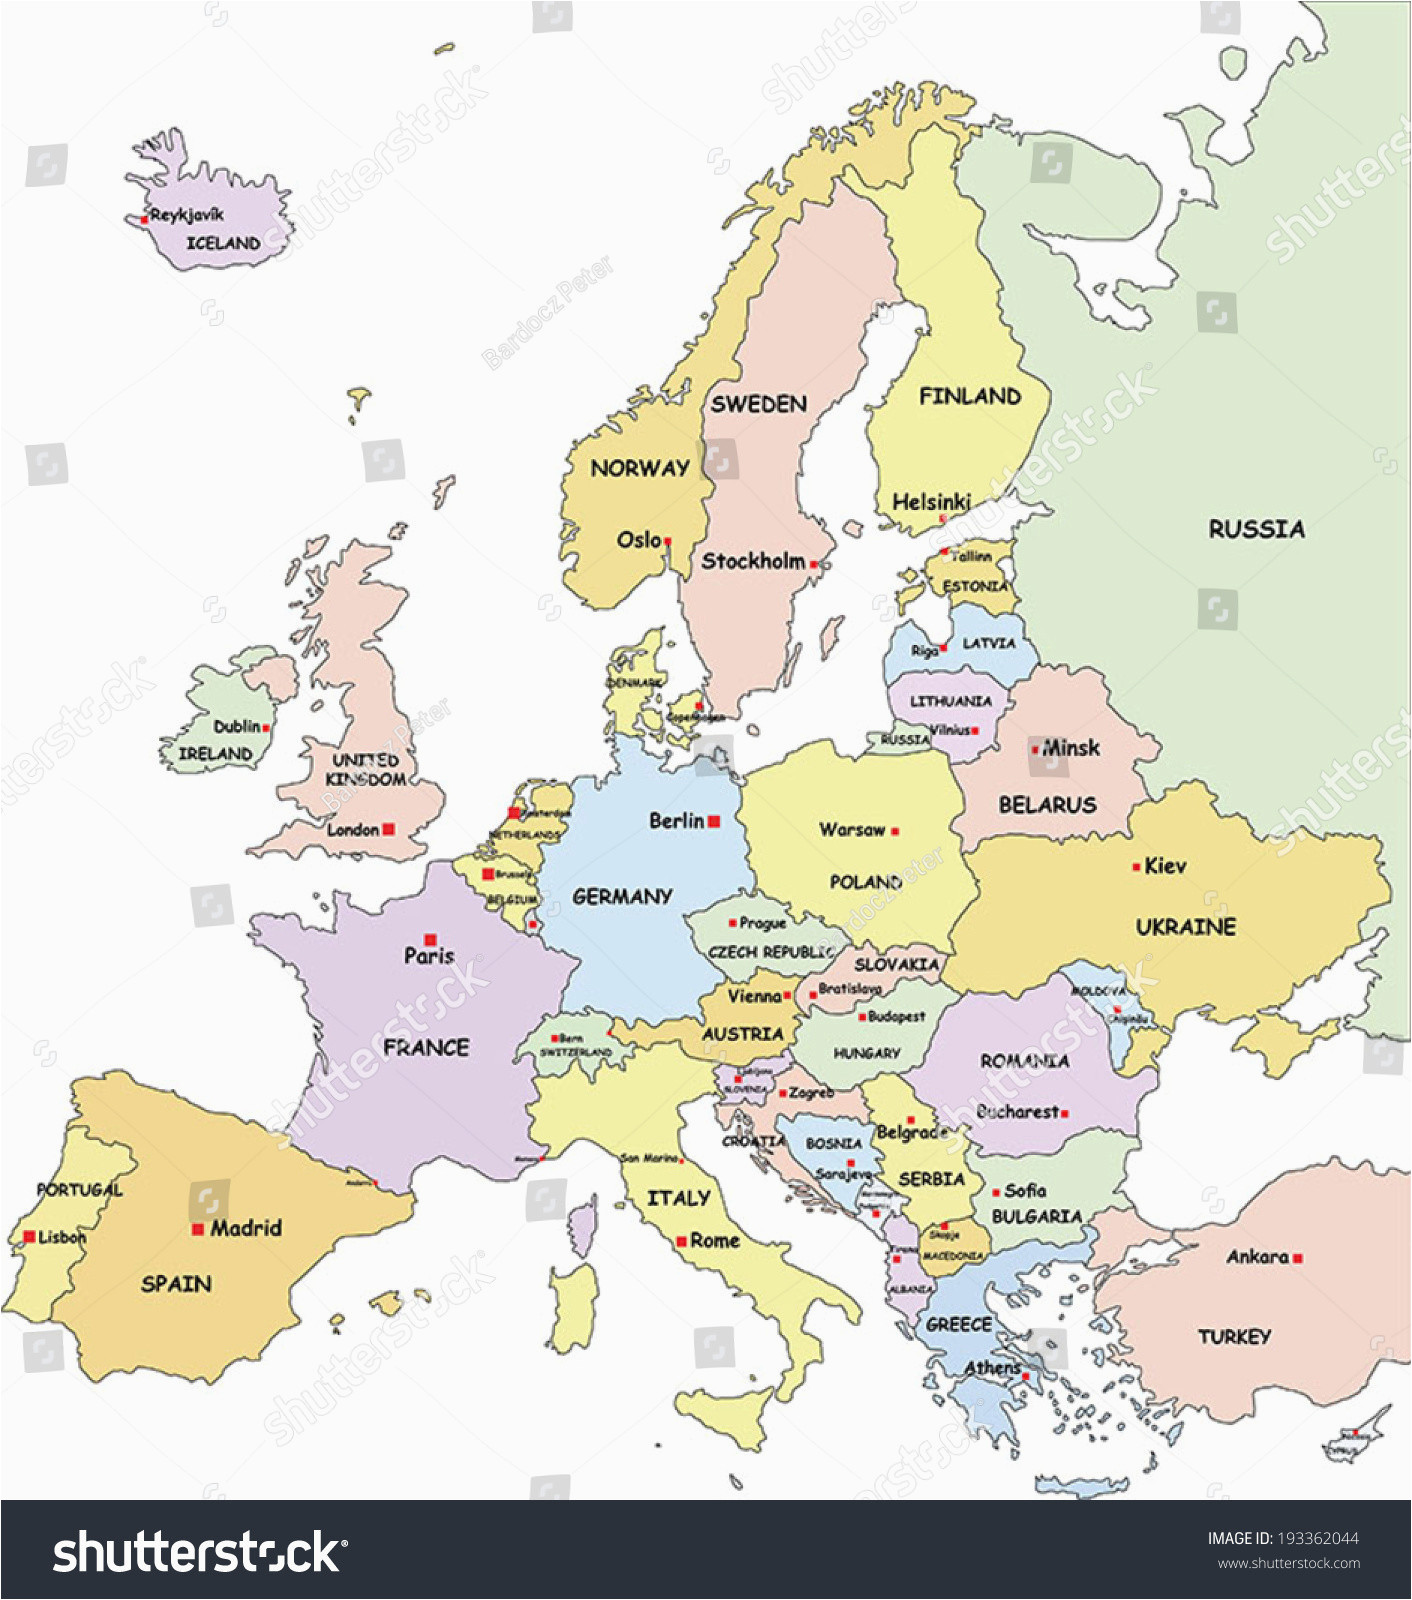 36 abundant map of eu with country names